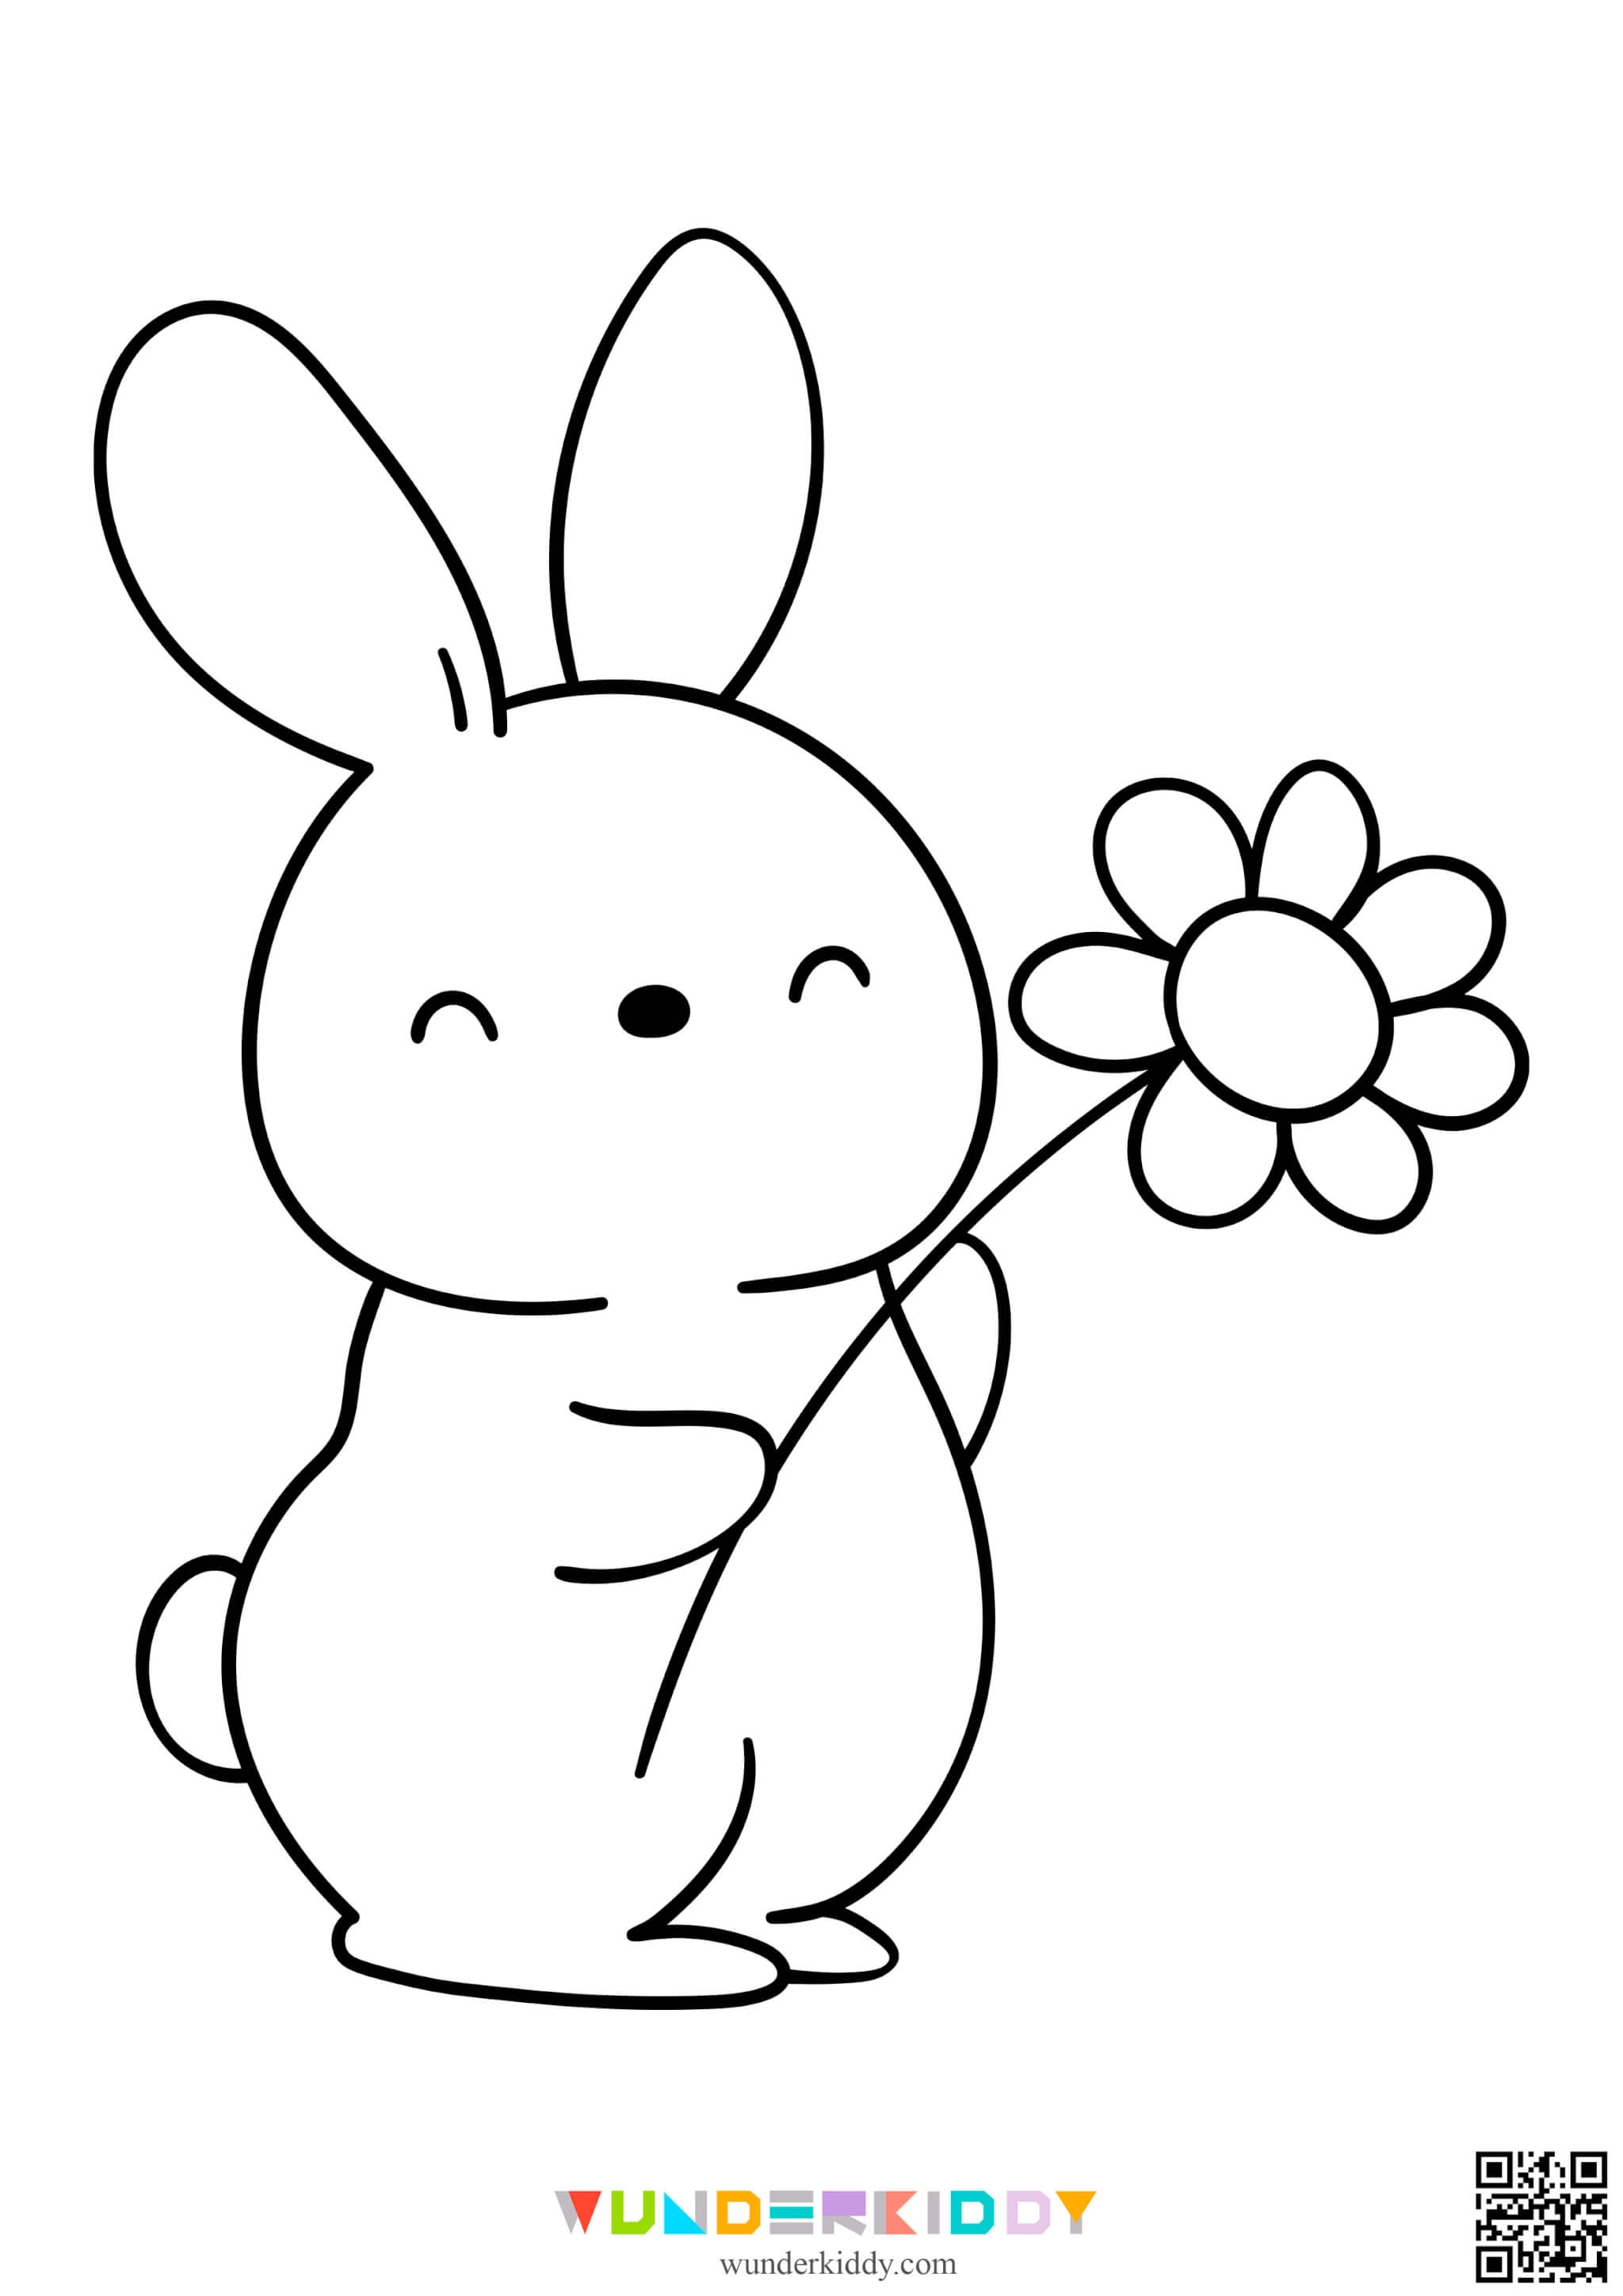 Spring Coloring Pages - Image 13